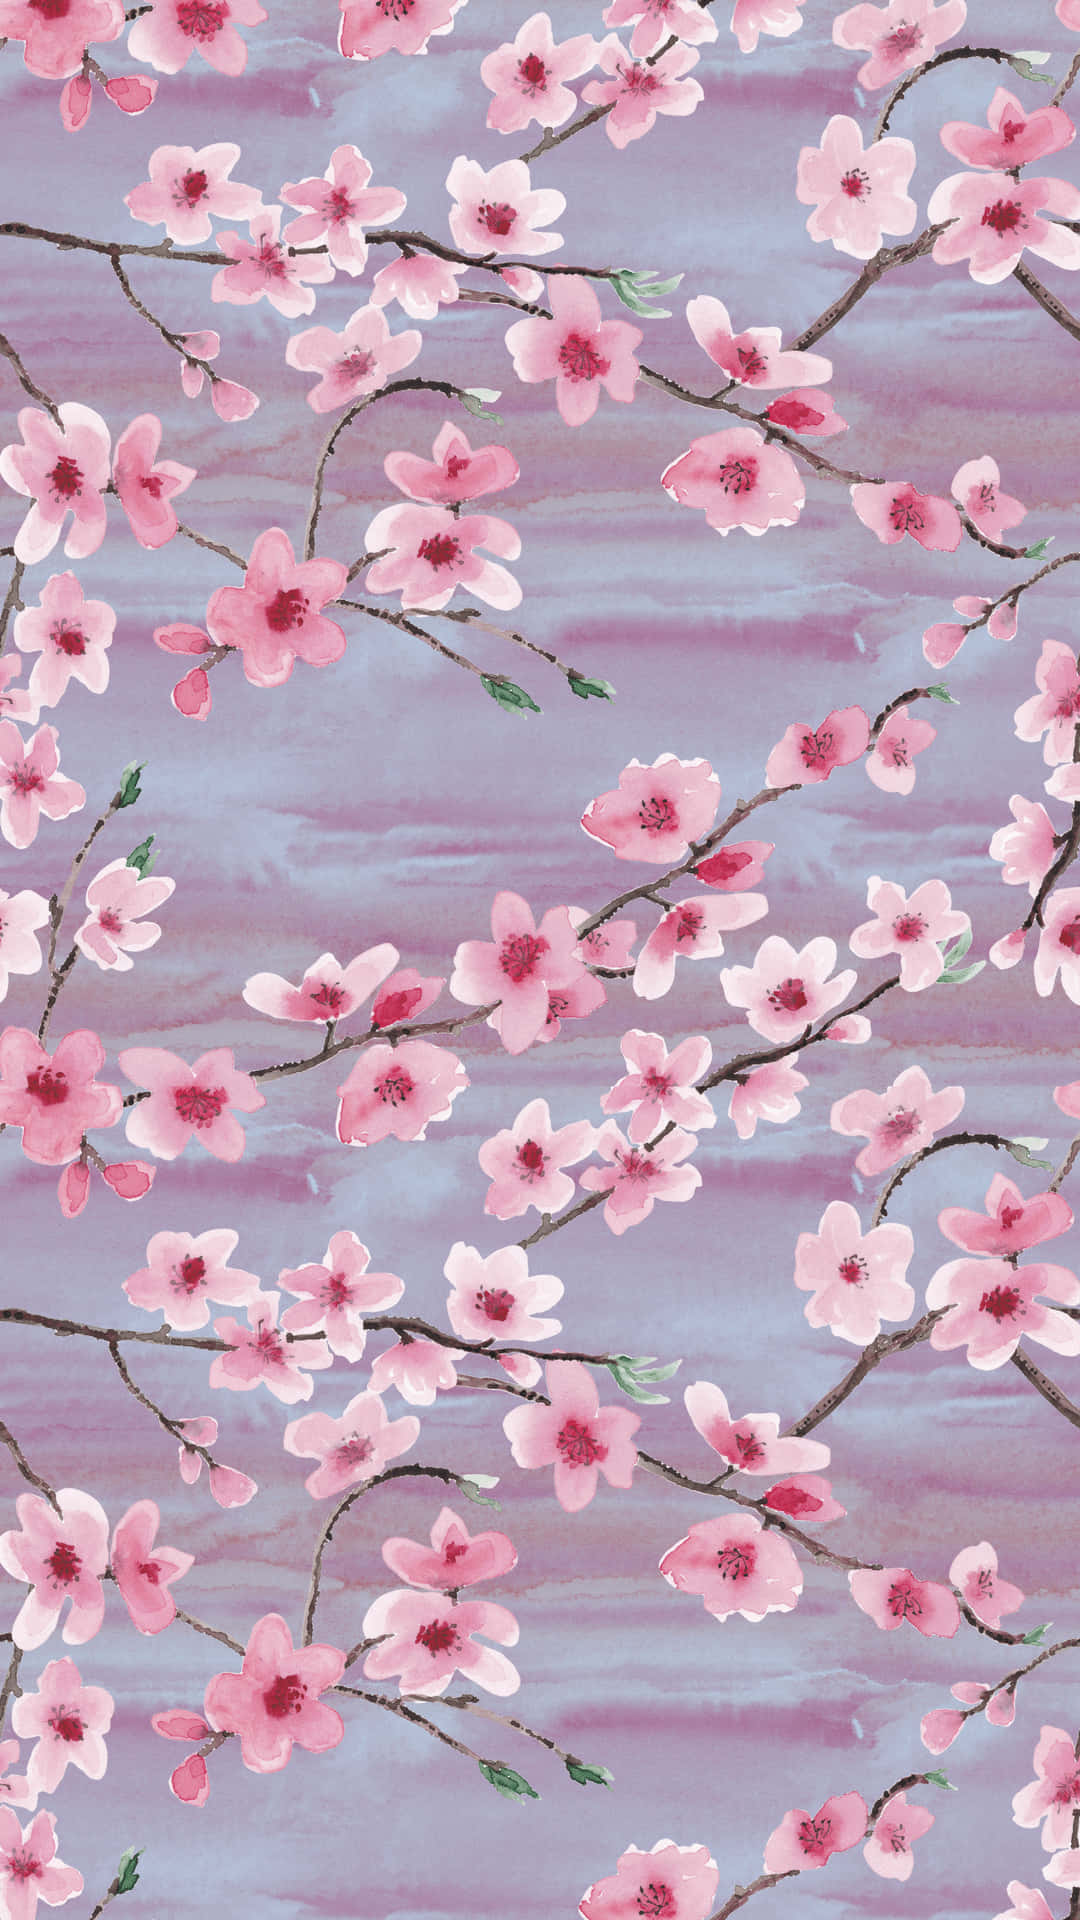 A delicate pink cherry blossom filled with romance. Wallpaper